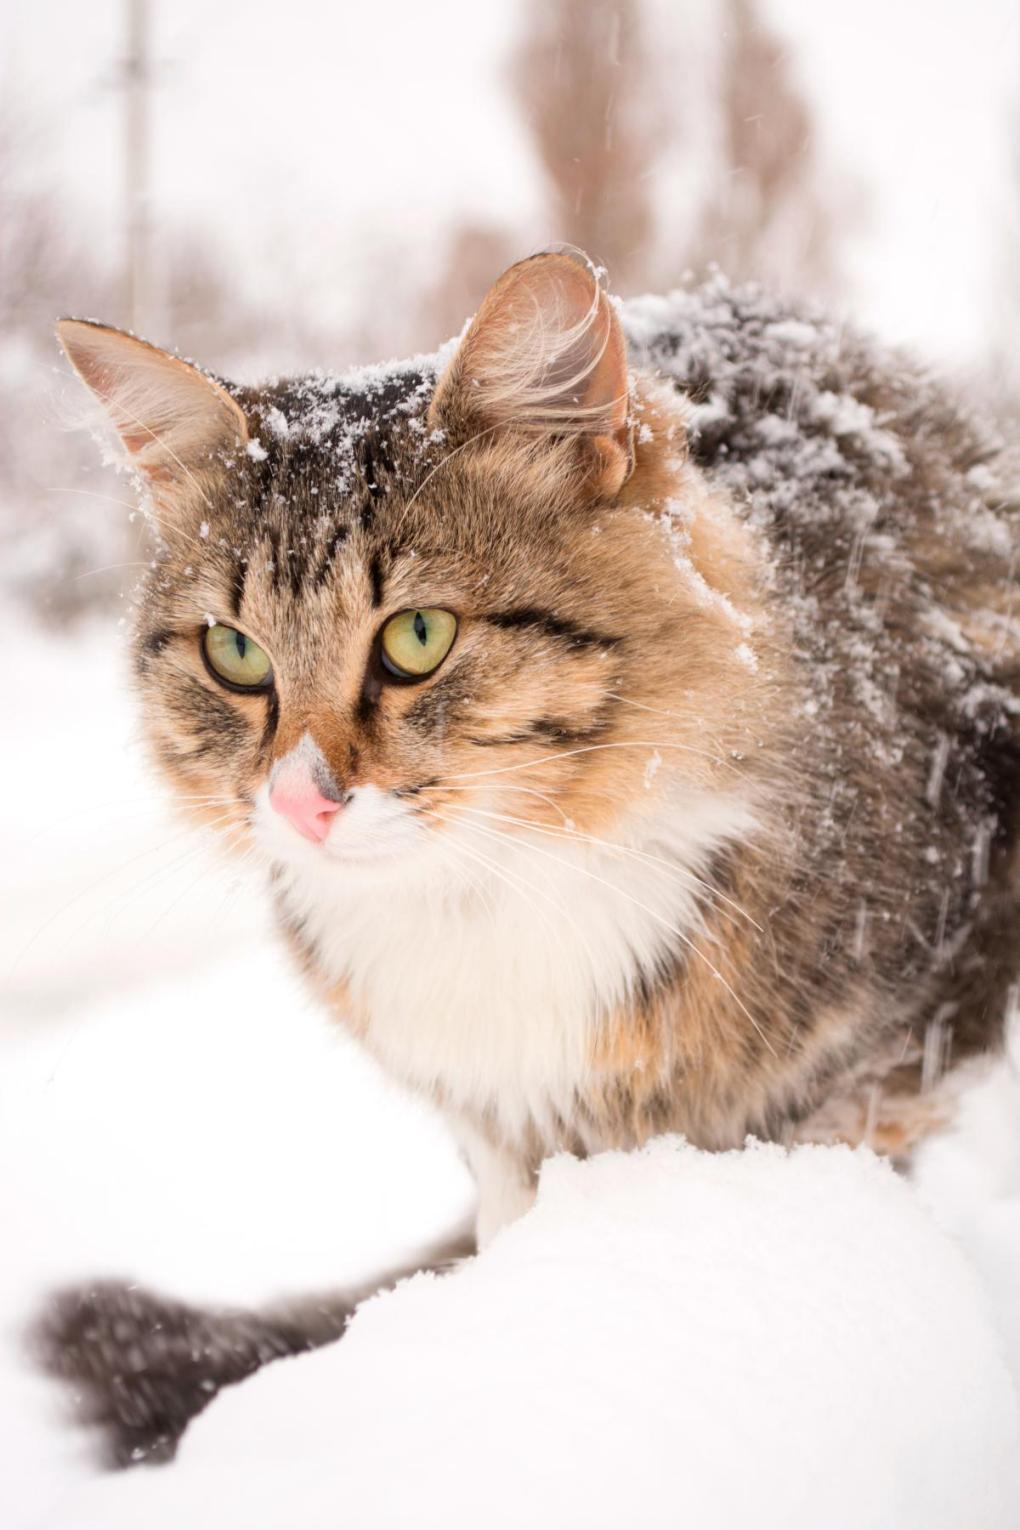 How to Keep Your Cat Happy in Winter